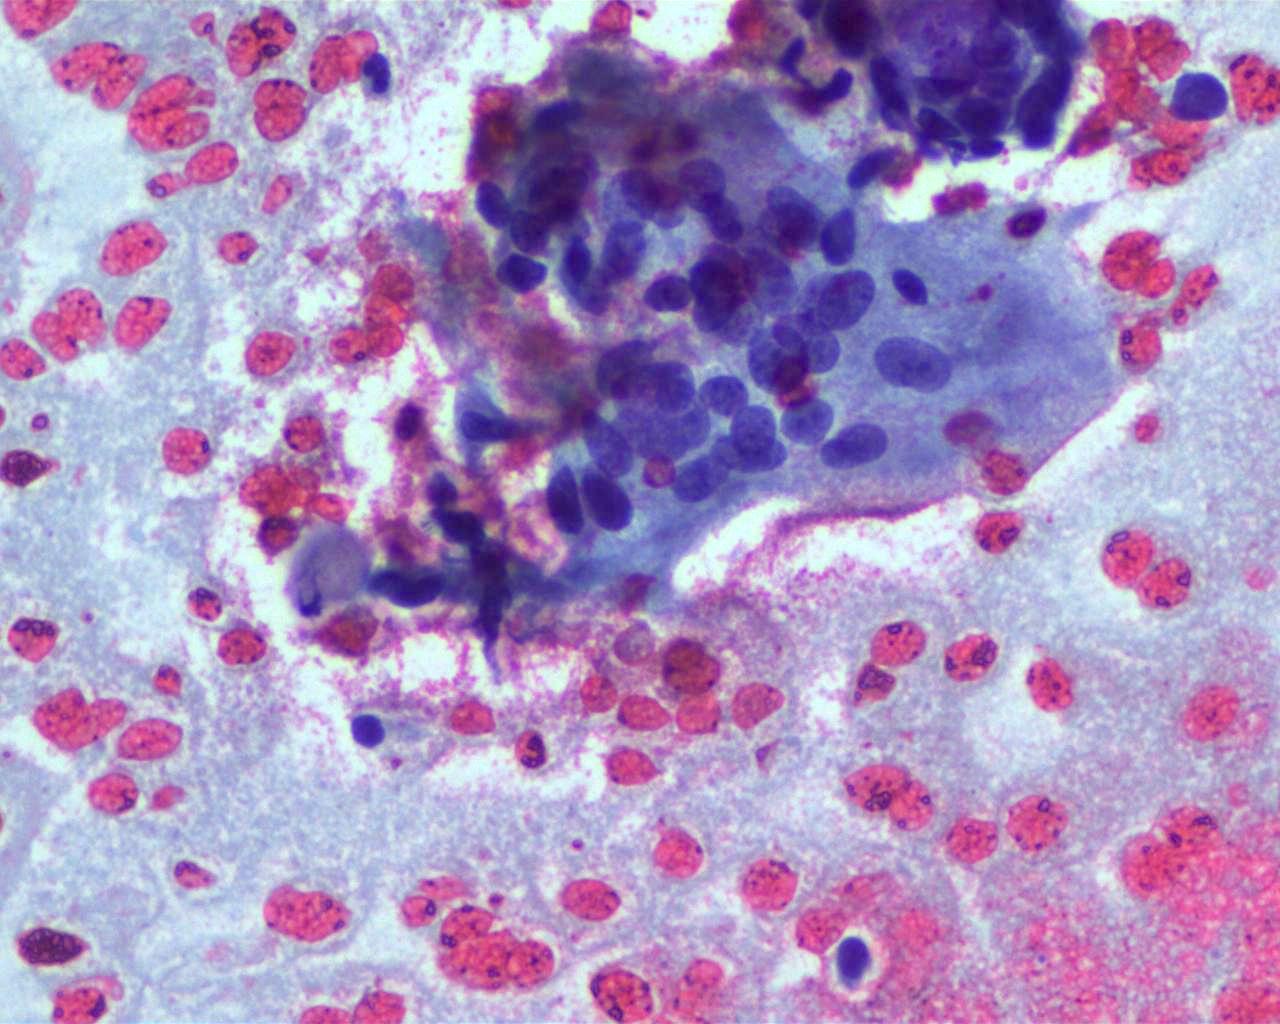 Giant cell in smear